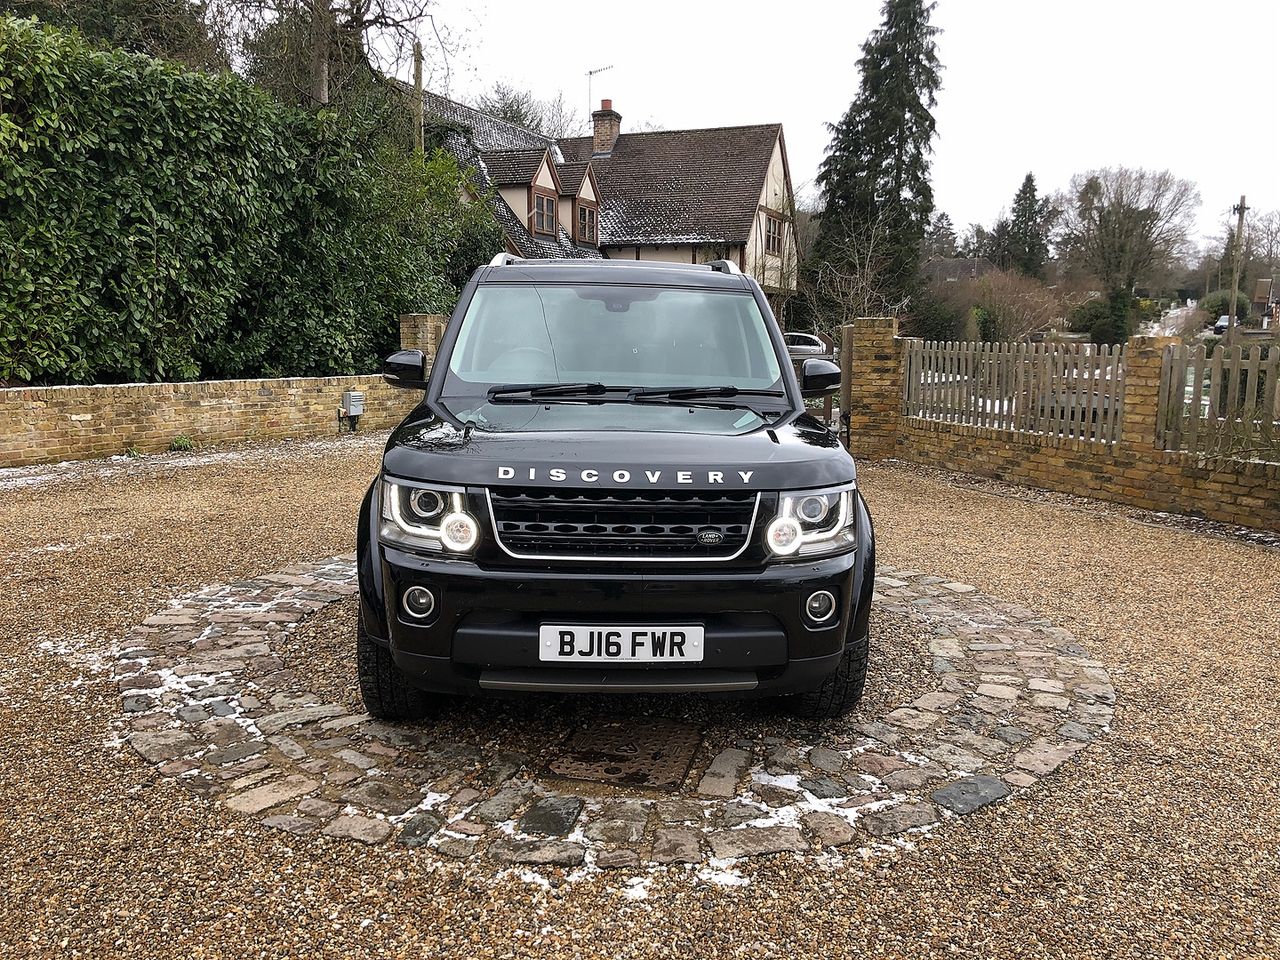 2016 LAND ROVER Discovery 3.0 SDV6 Landmark - Picture 3 of 14